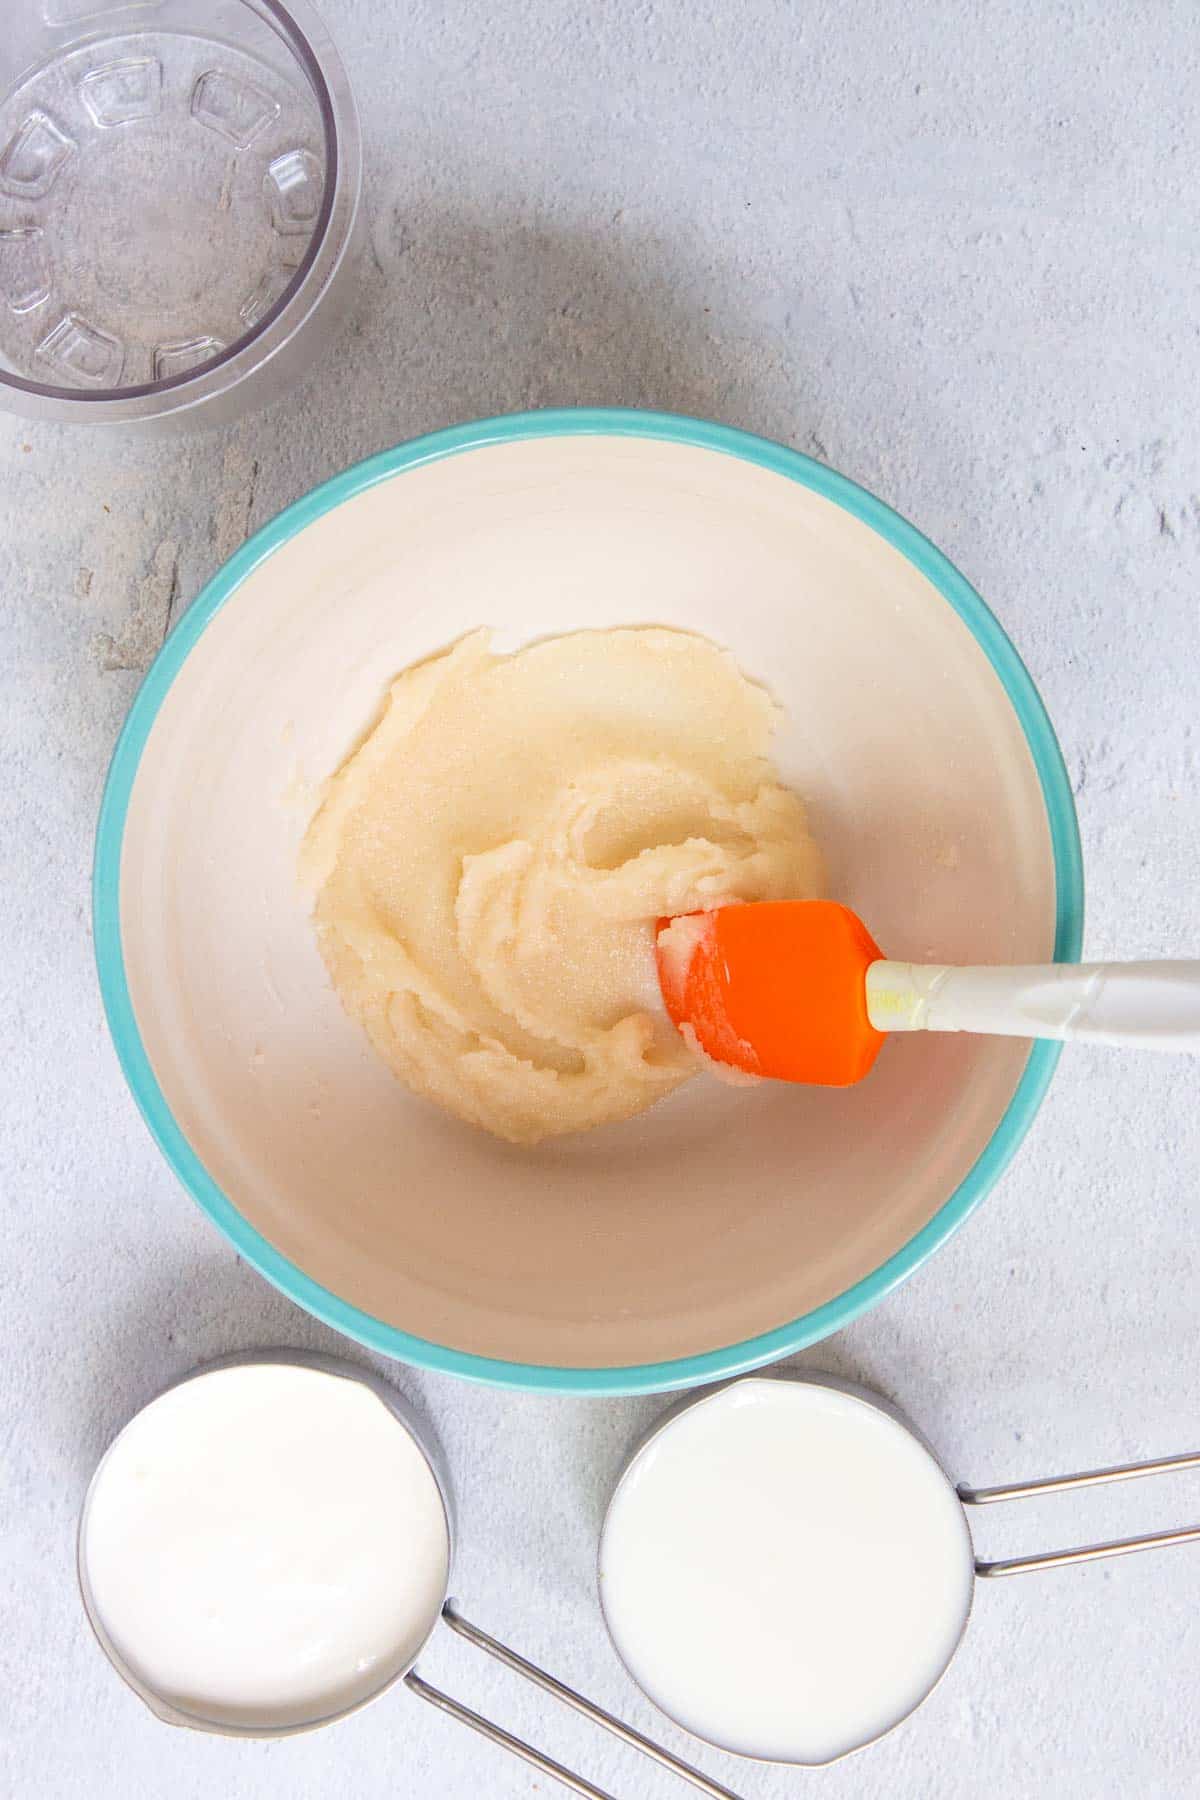 The vanilla and sugar are mixed into the softened ice cream to create a thick paste